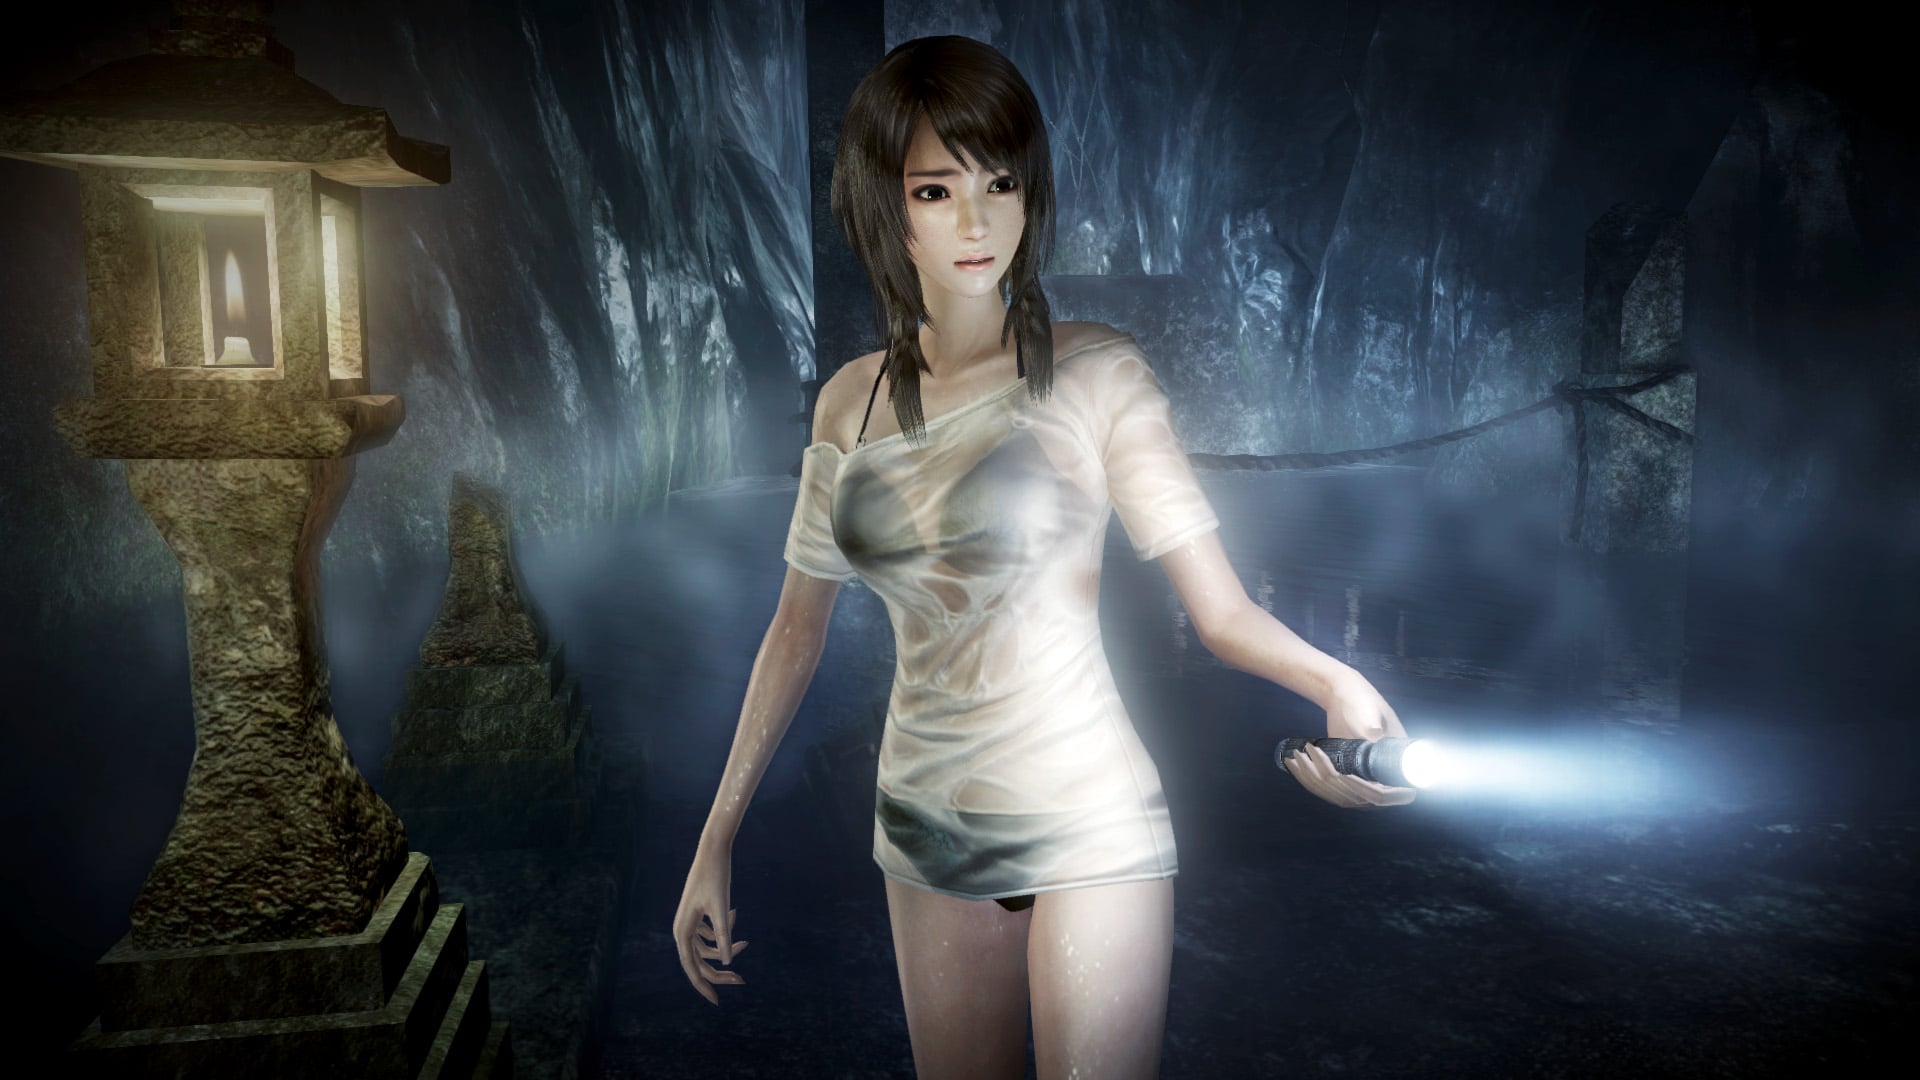 where can i buy fatal frame 4